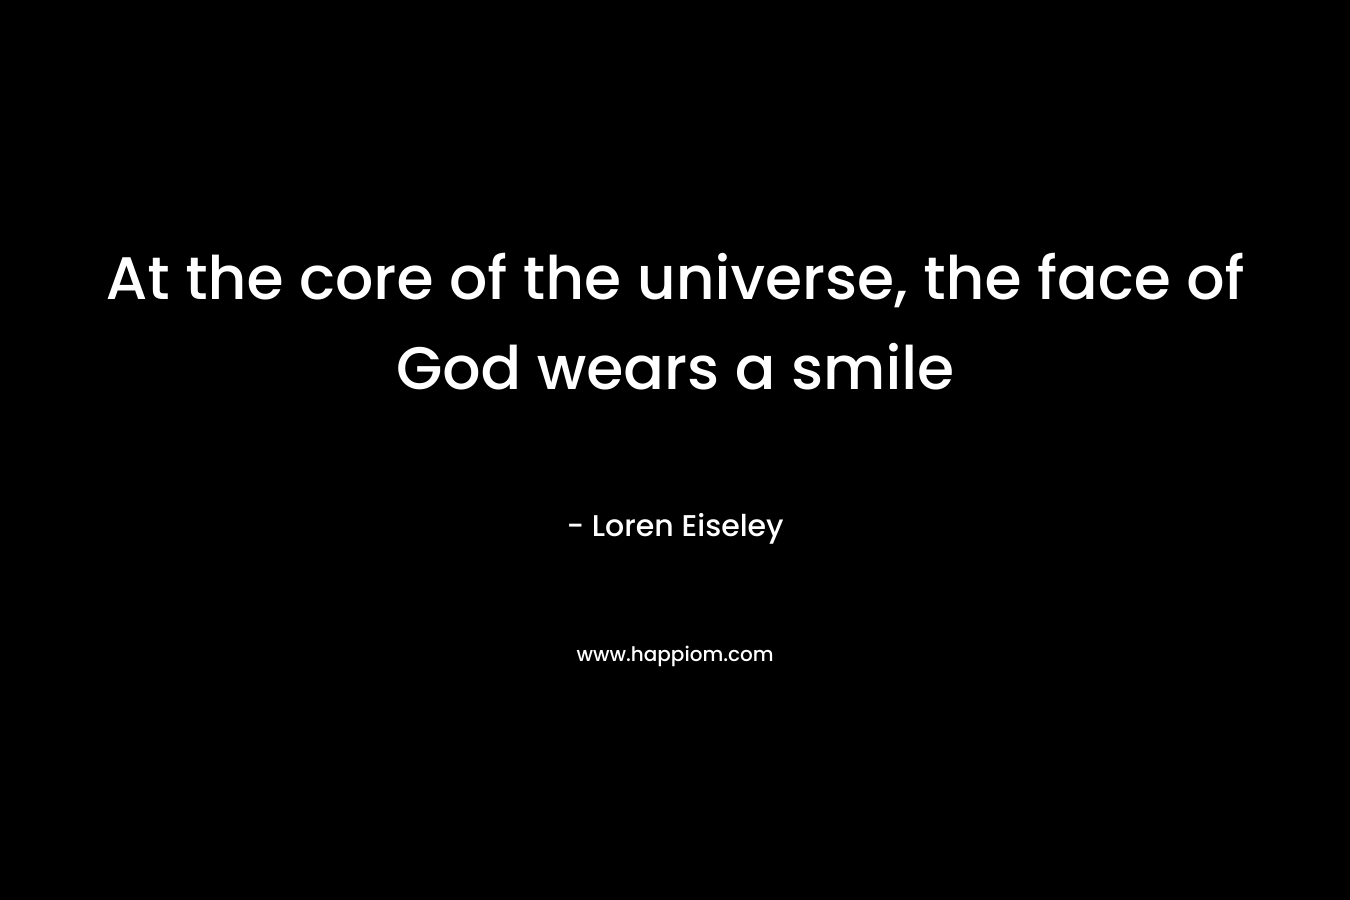 At the core of the universe, the face of God wears a smile – Loren Eiseley